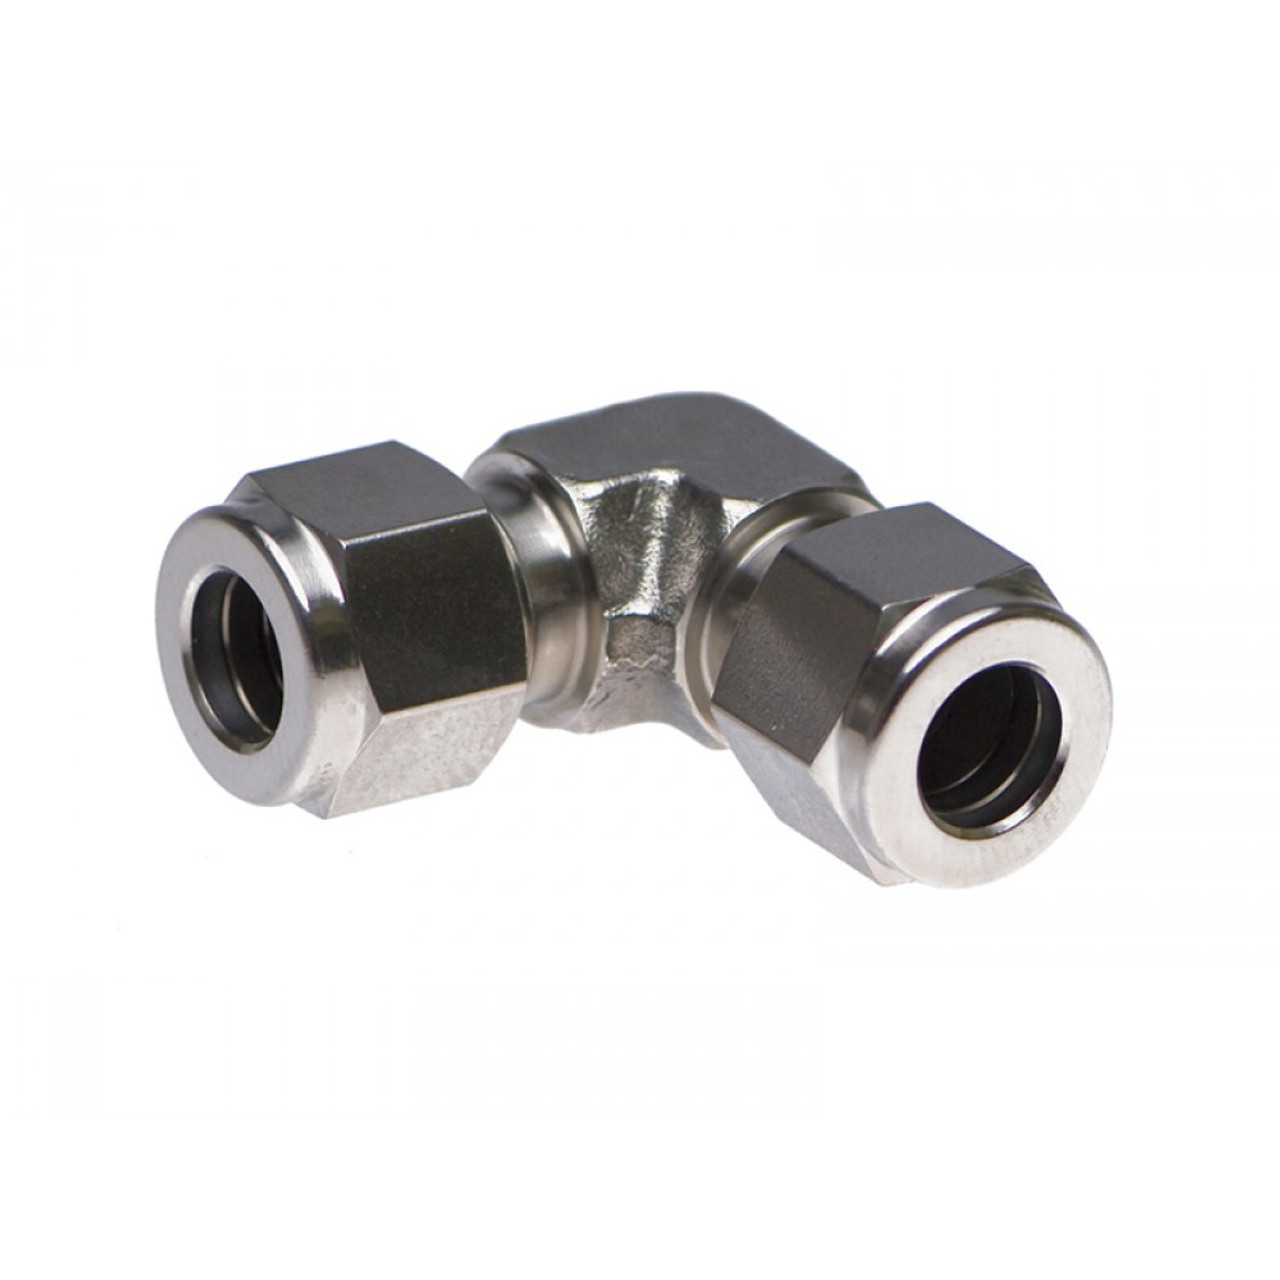 3/8 Compression Stainless Fitting for Connection to 3/8 Stainless Tubing